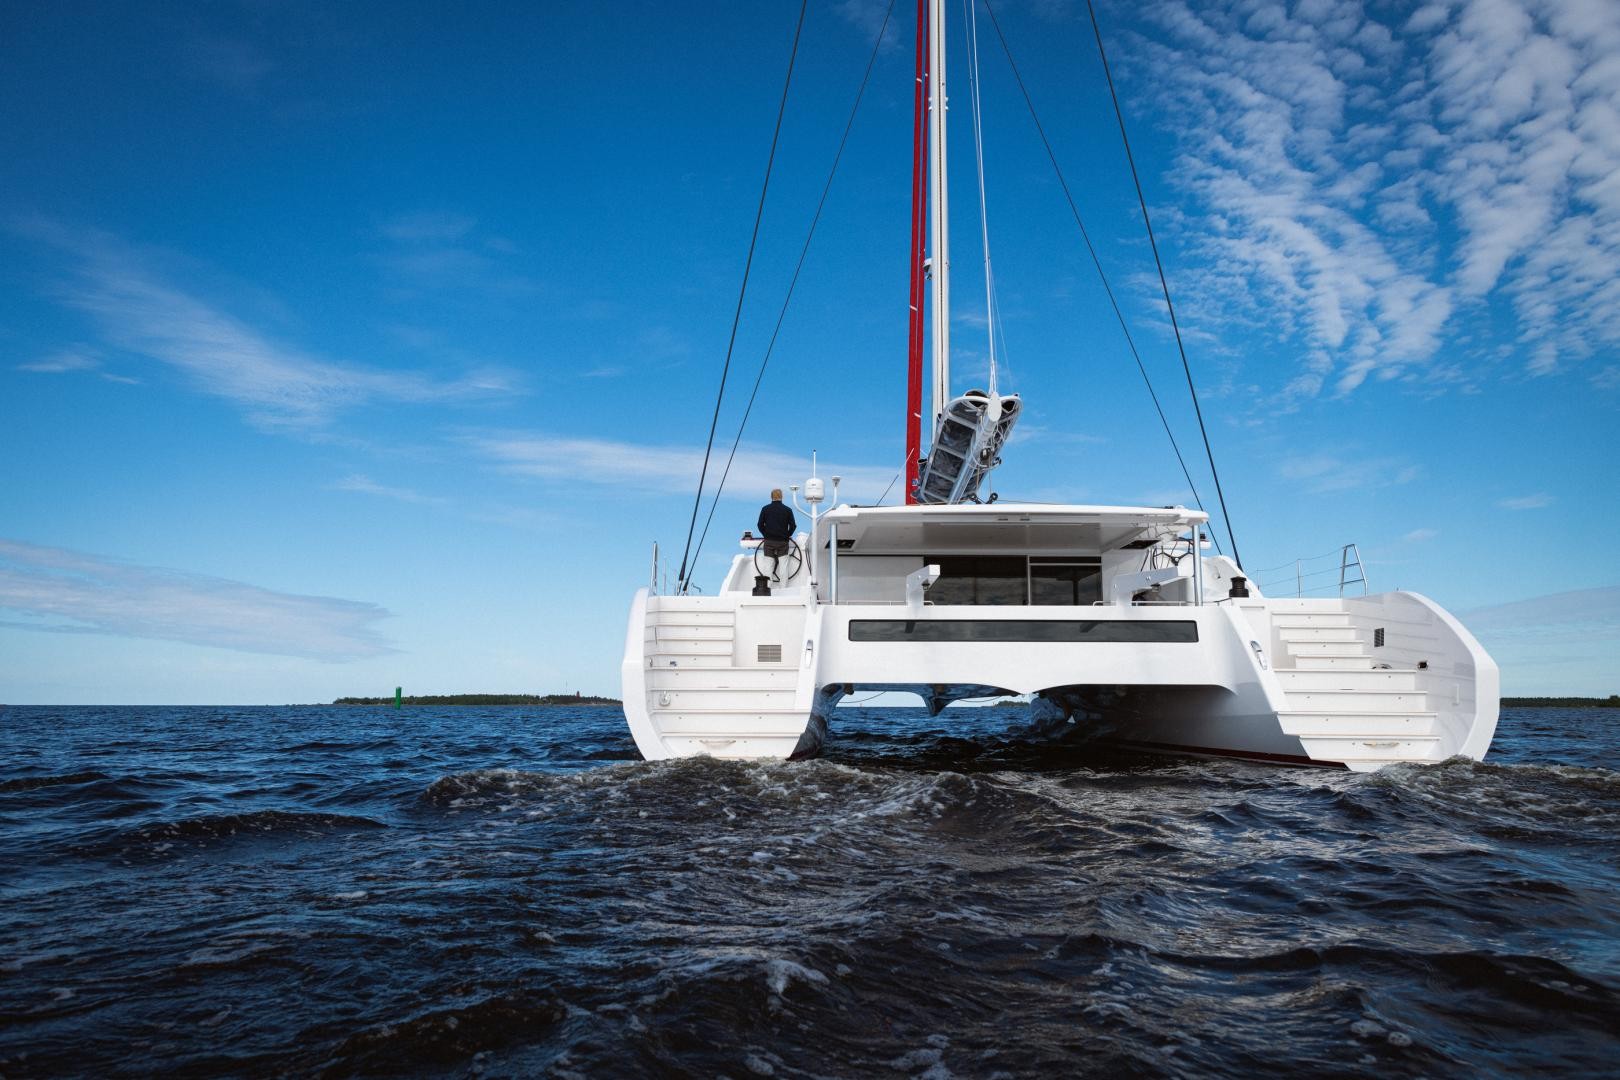 A green power plant of a boat: the Ocean Explorer 72 powered by Torqeedo